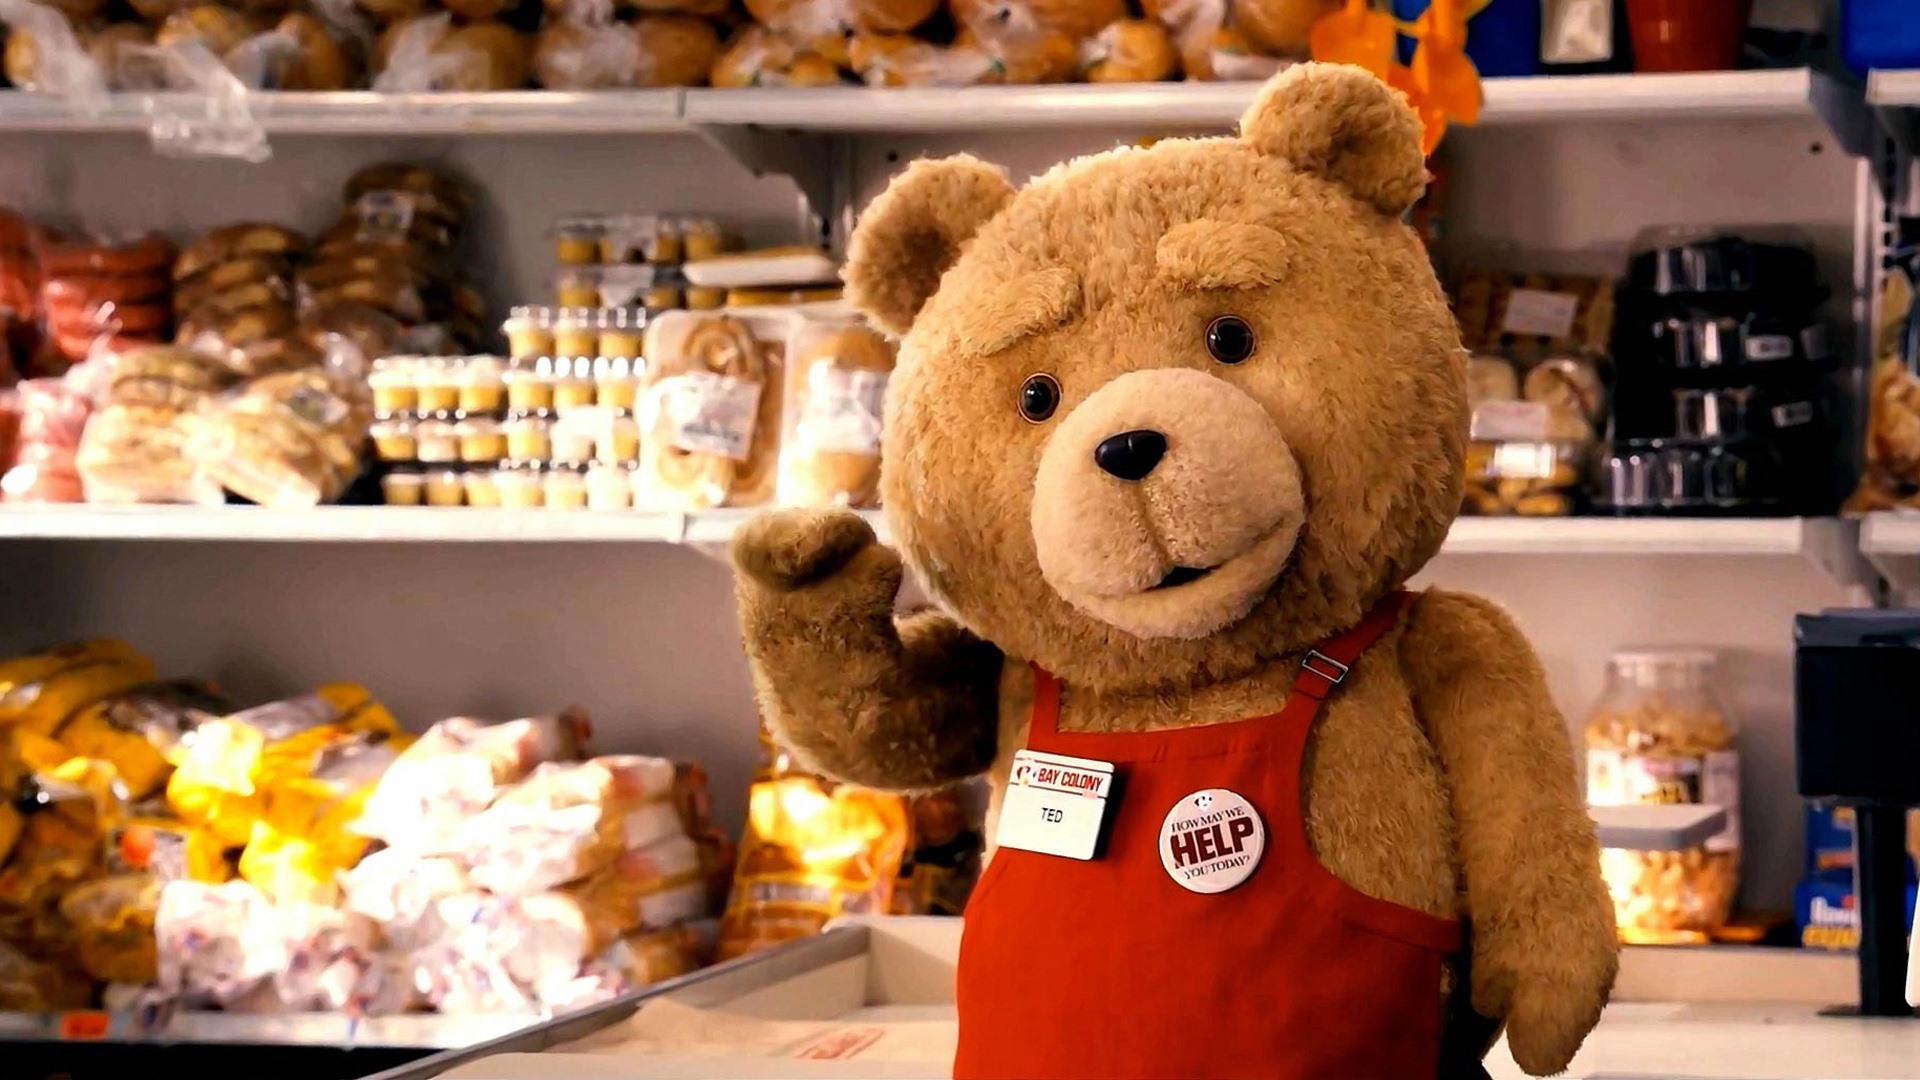 Ted 2012 HD movie wallpapers #18 - 1920x1080